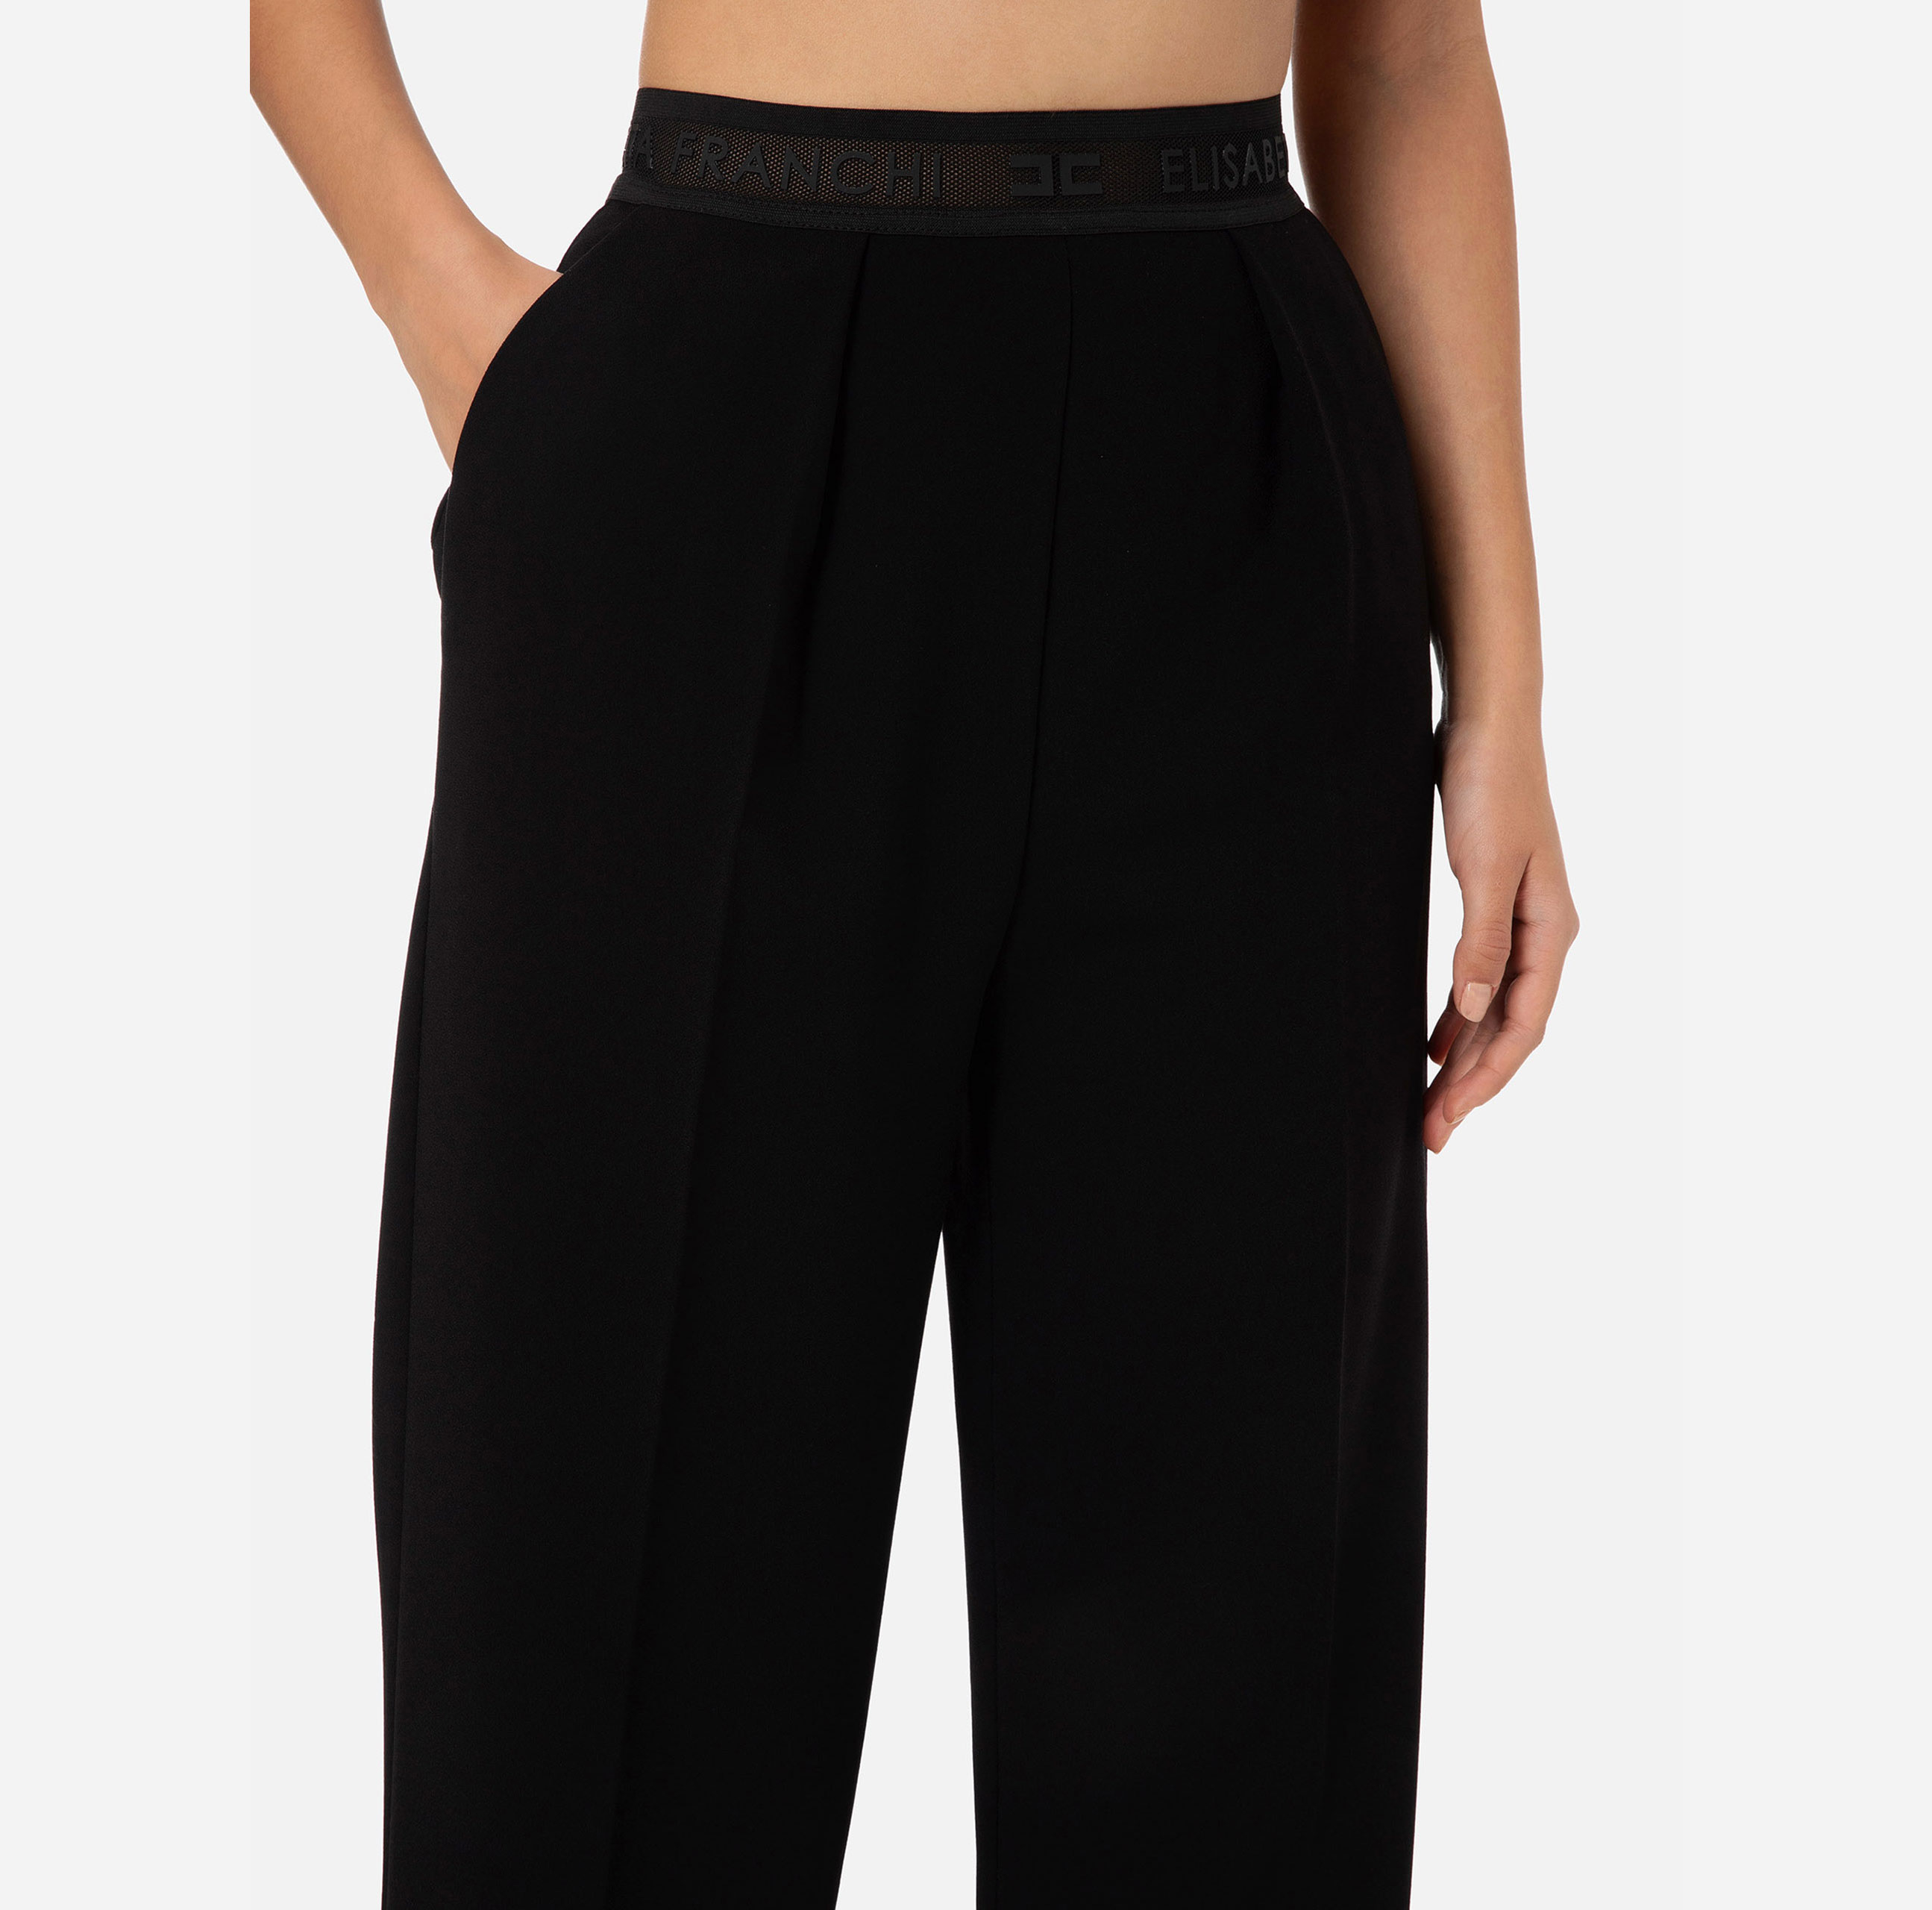 Trousers with logo and lace - Elisabetta Franchi